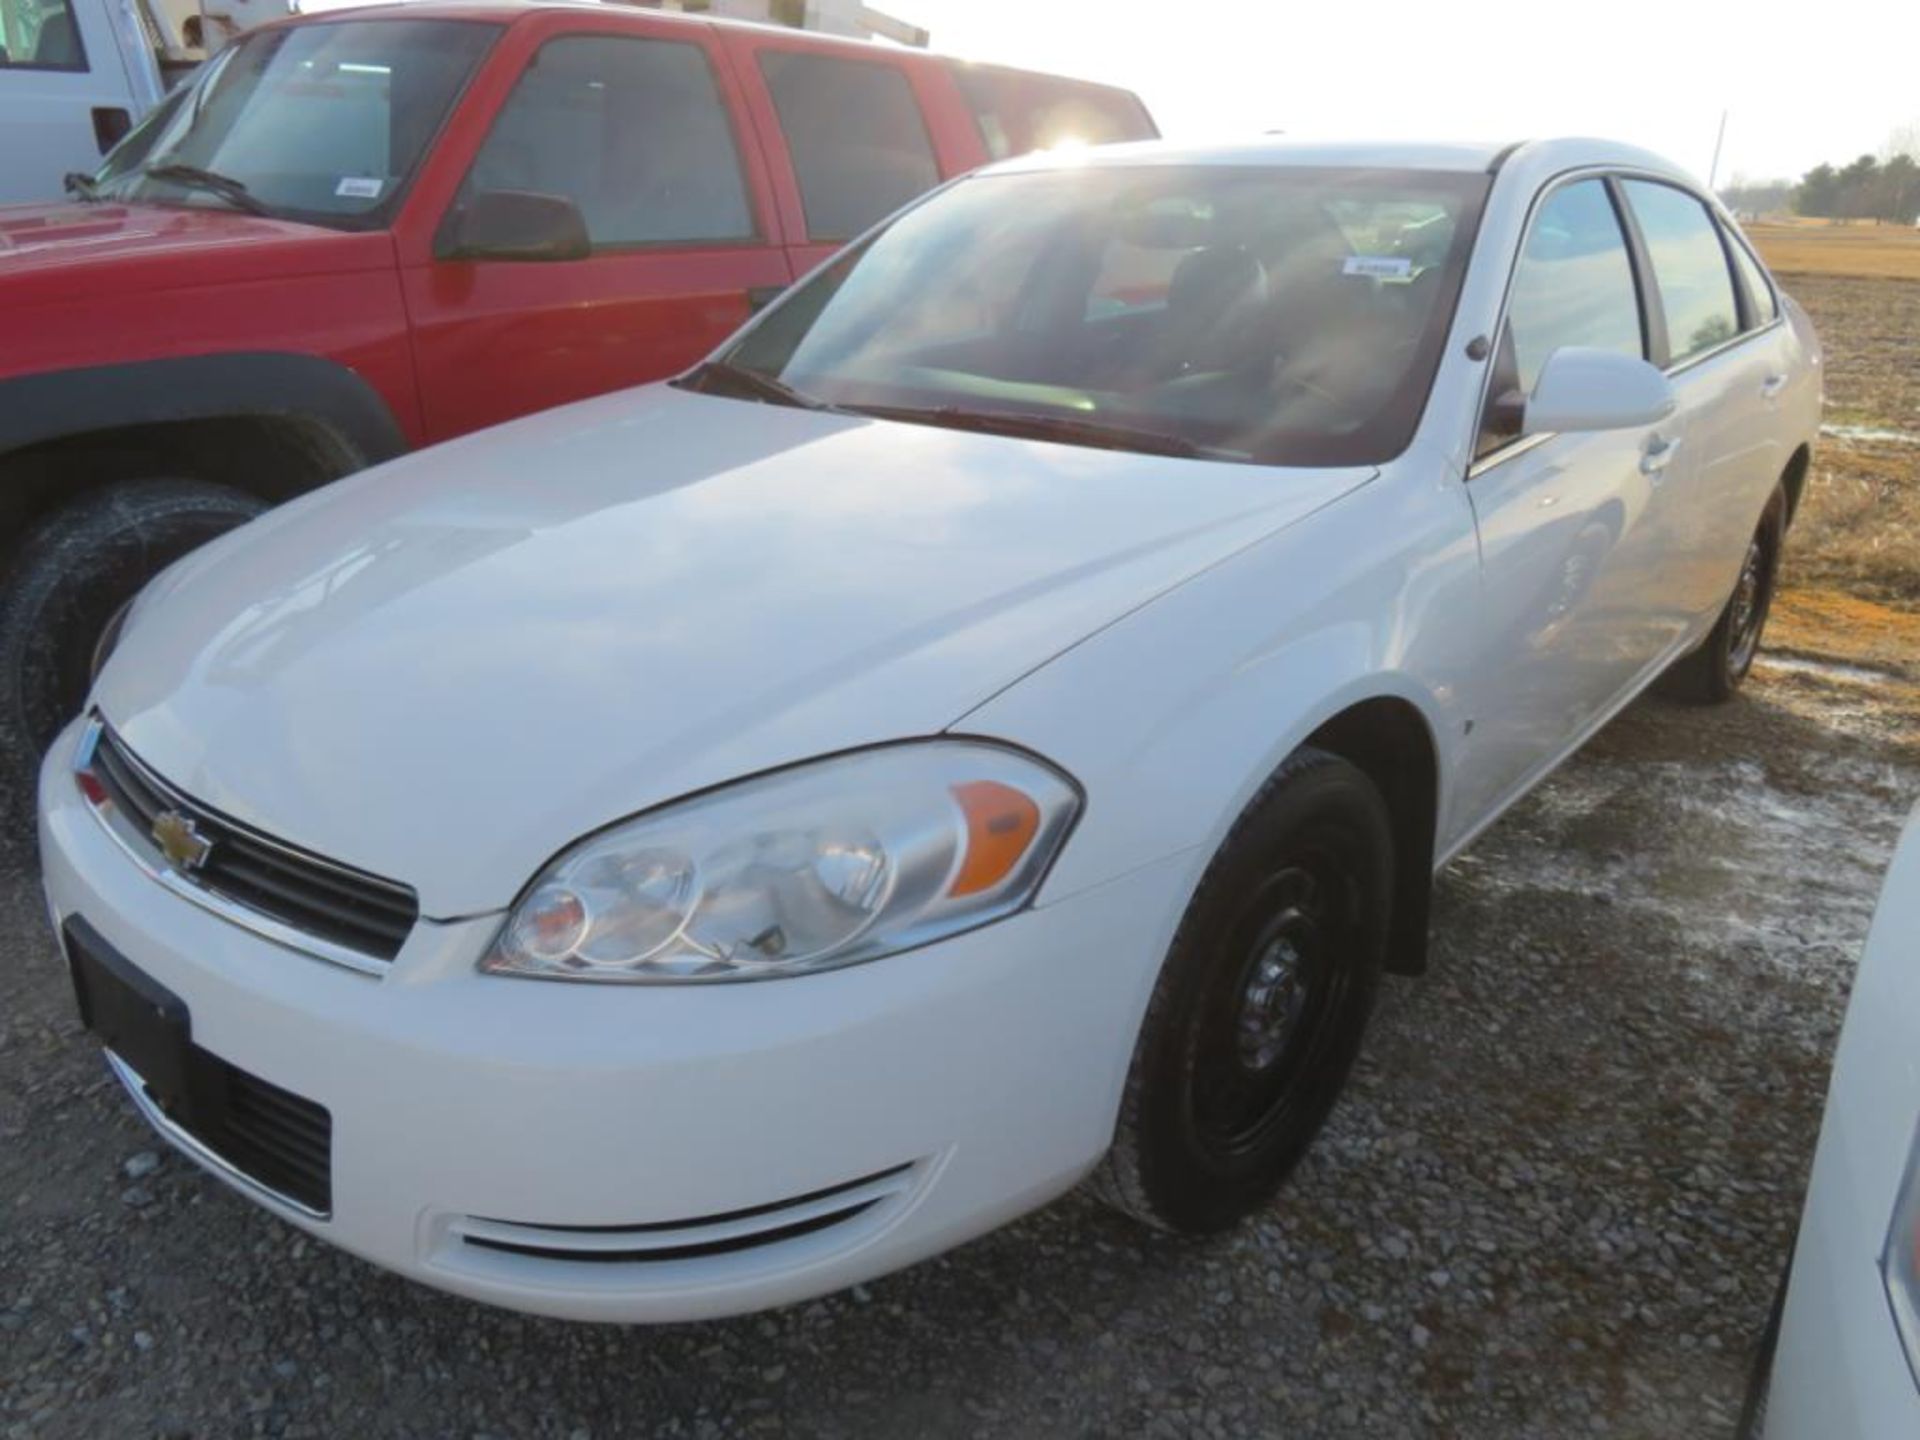 2008 White Chevy Impala (title) just over 100,000 miles, was a police car vin, 2G1WS553681373993,